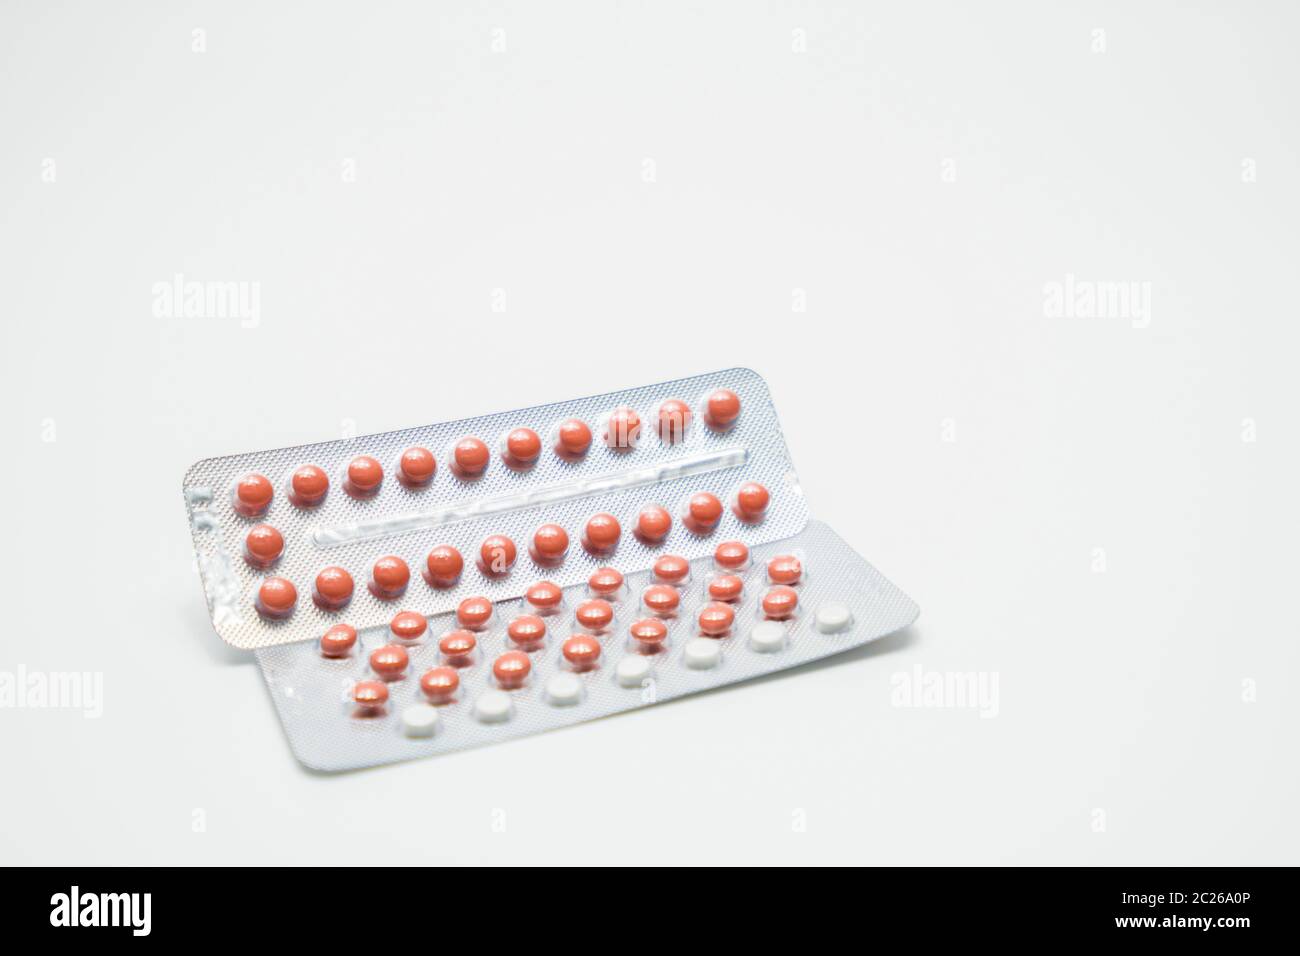 Contraceptive pills in blister pack on white background. Birth control pills 21 and 28 tablets. Hormones tablet pills. Pharmacy drugstore background. Stock Photo